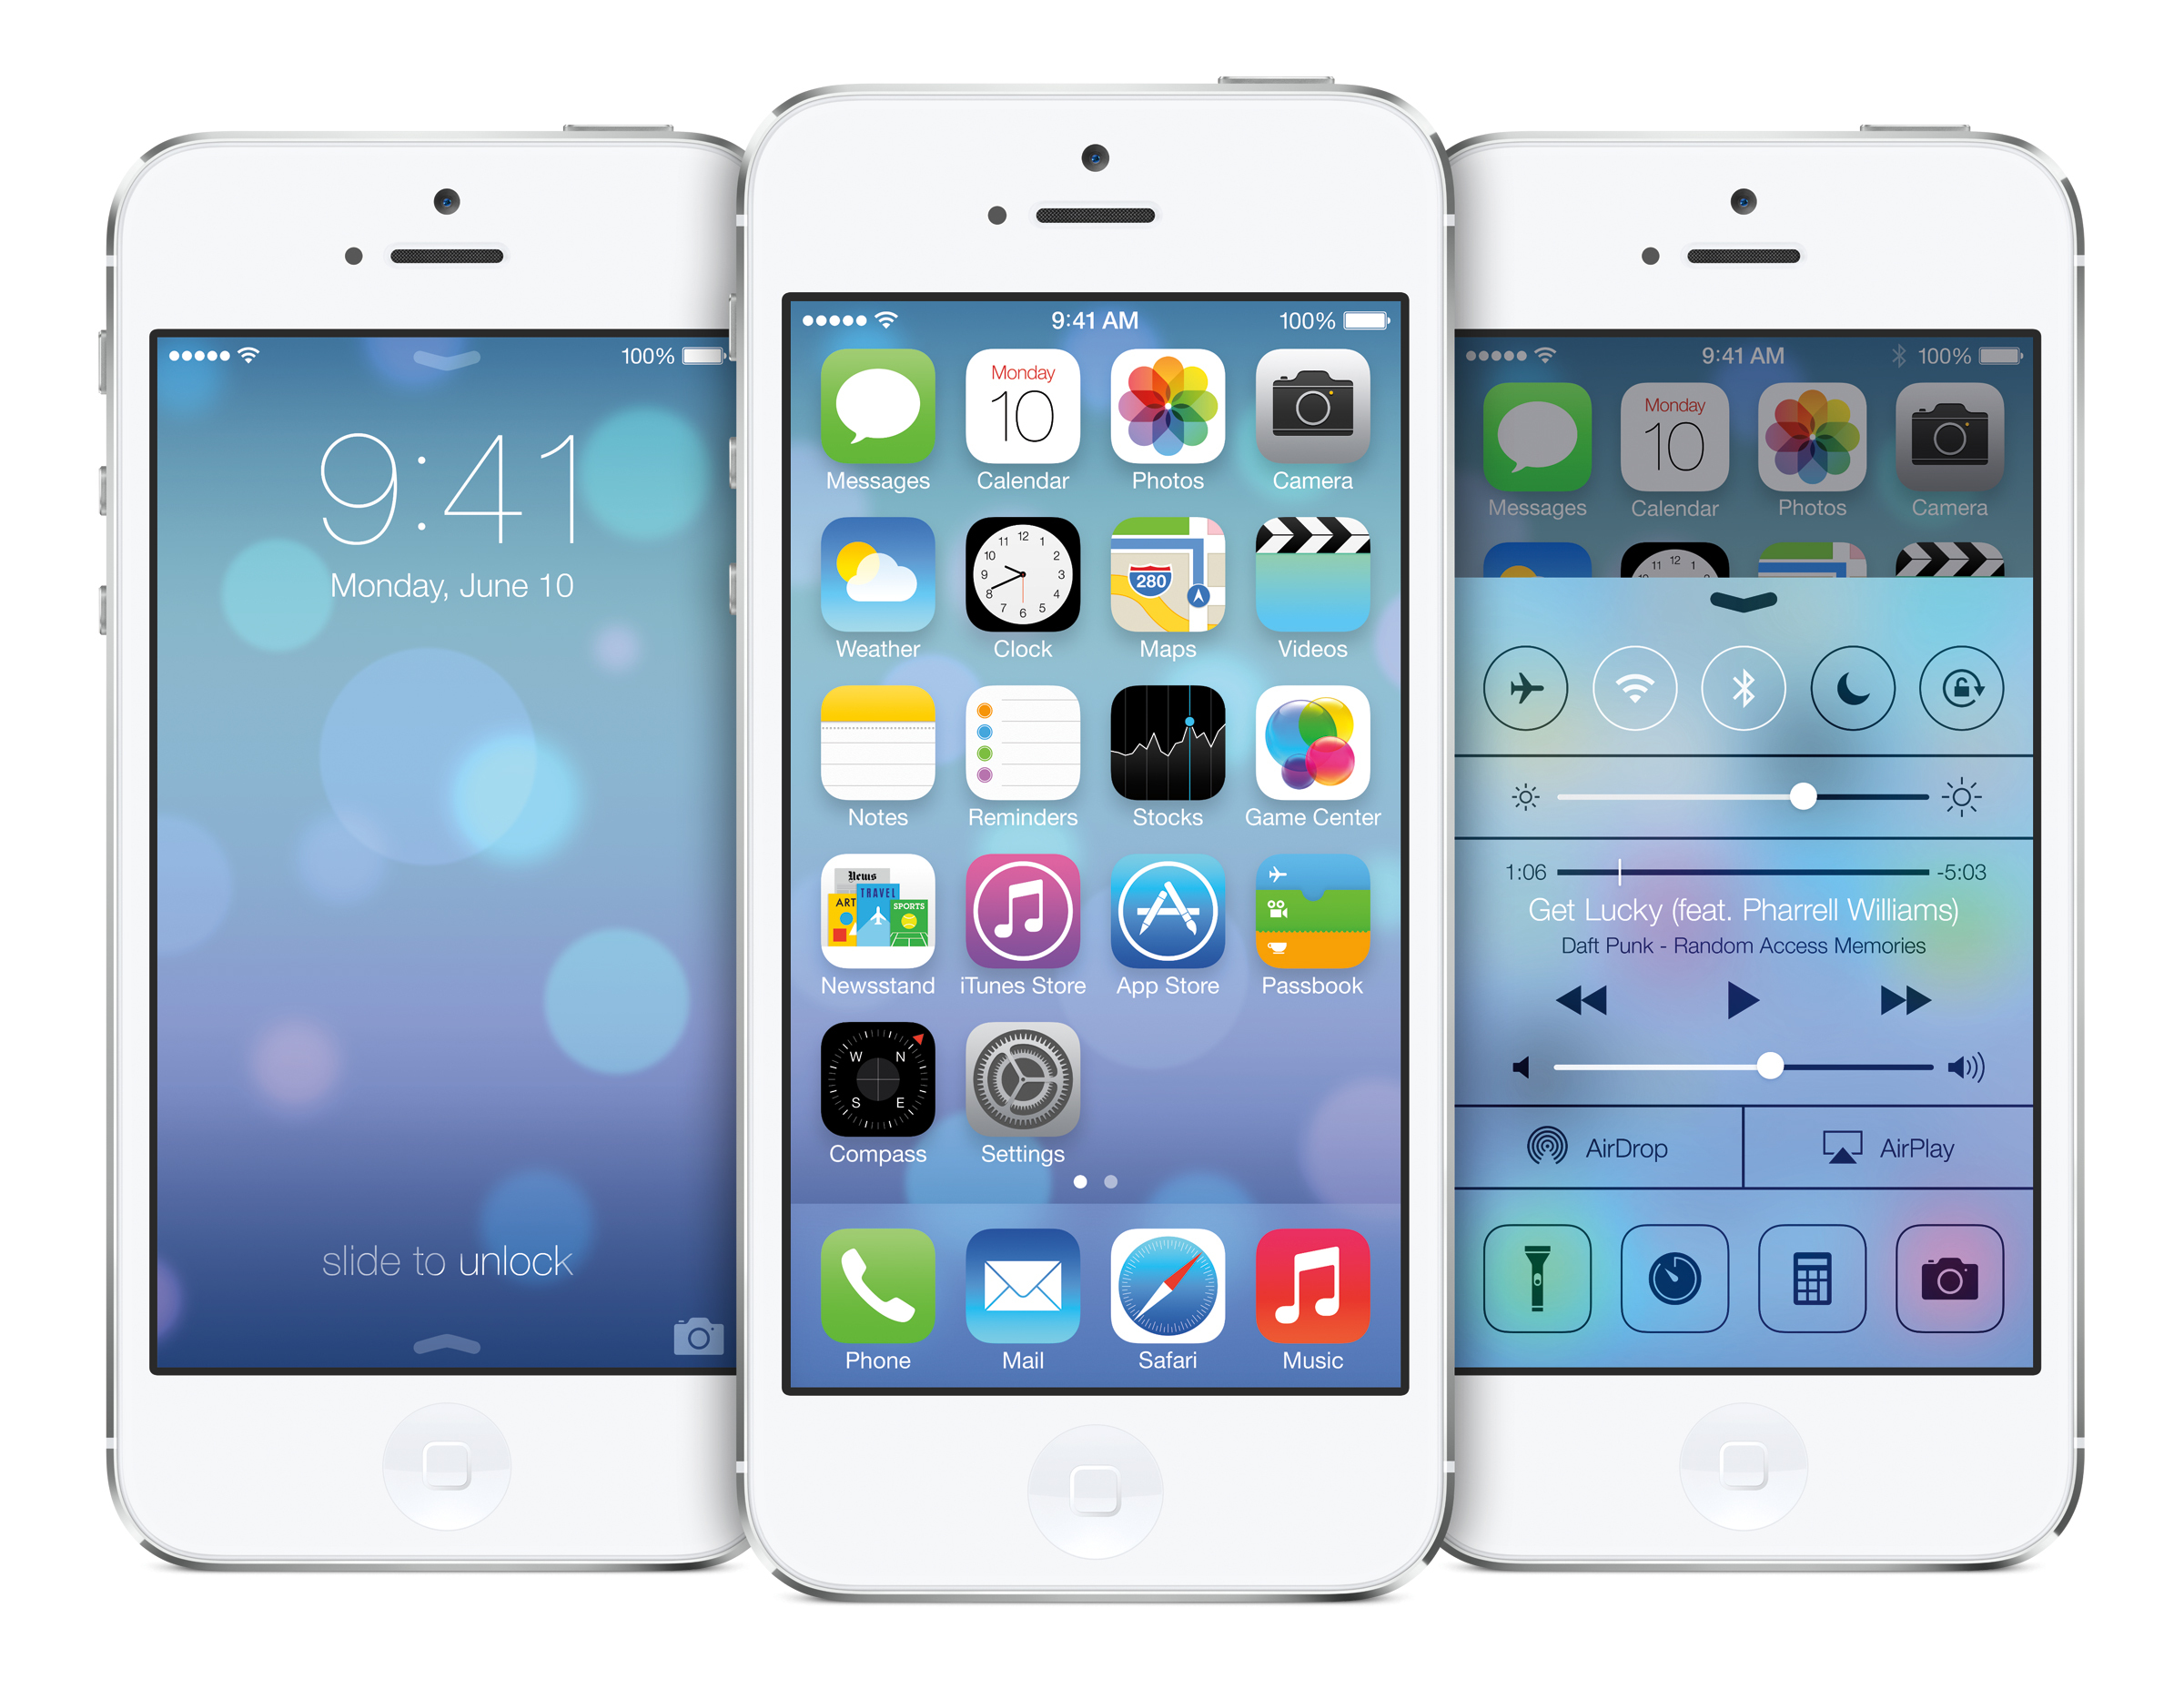 iOS 7: A New Beginning for iOS